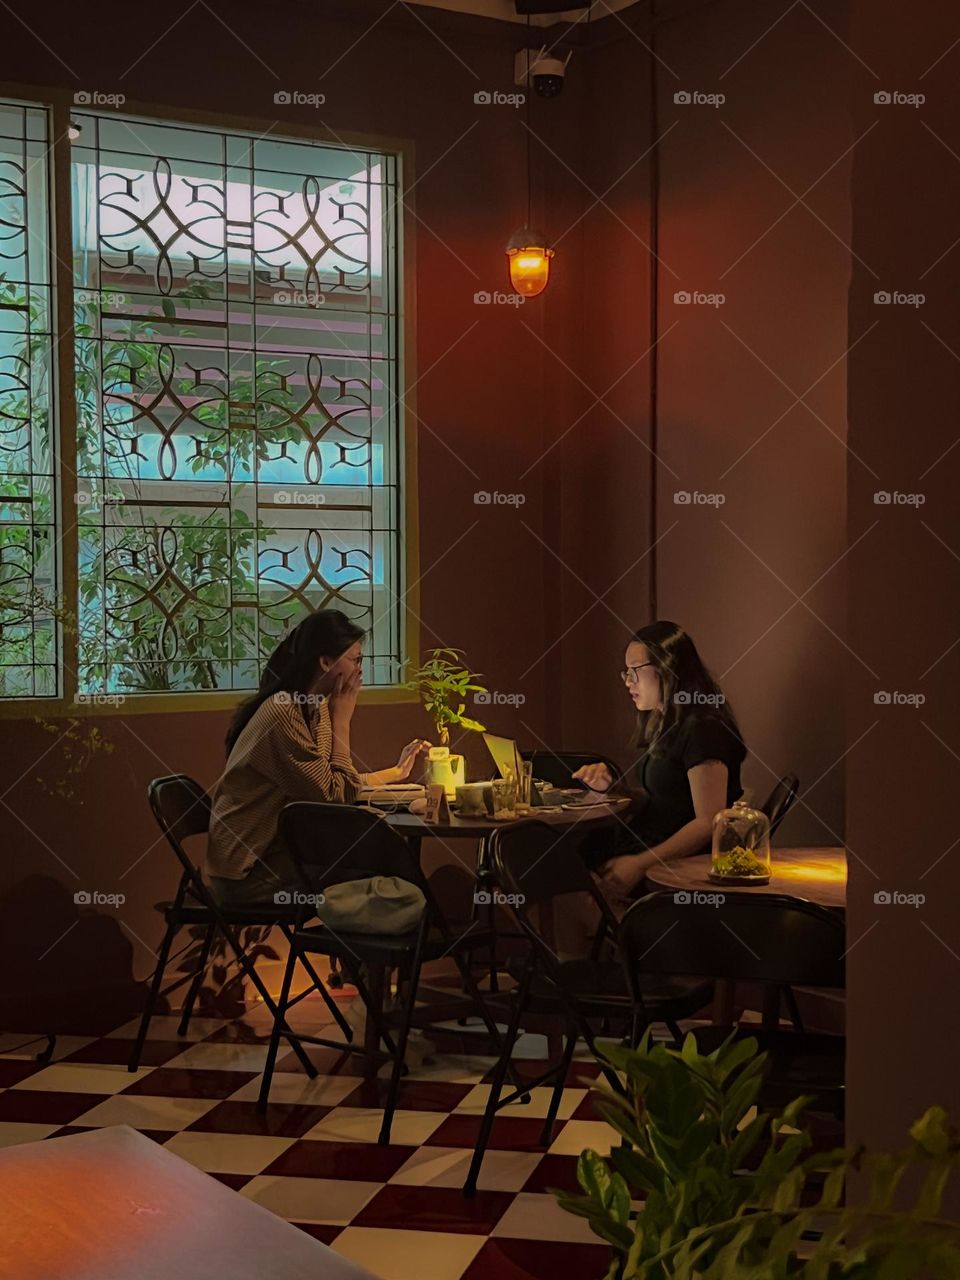 Indochine style was used in a coffeeshop 